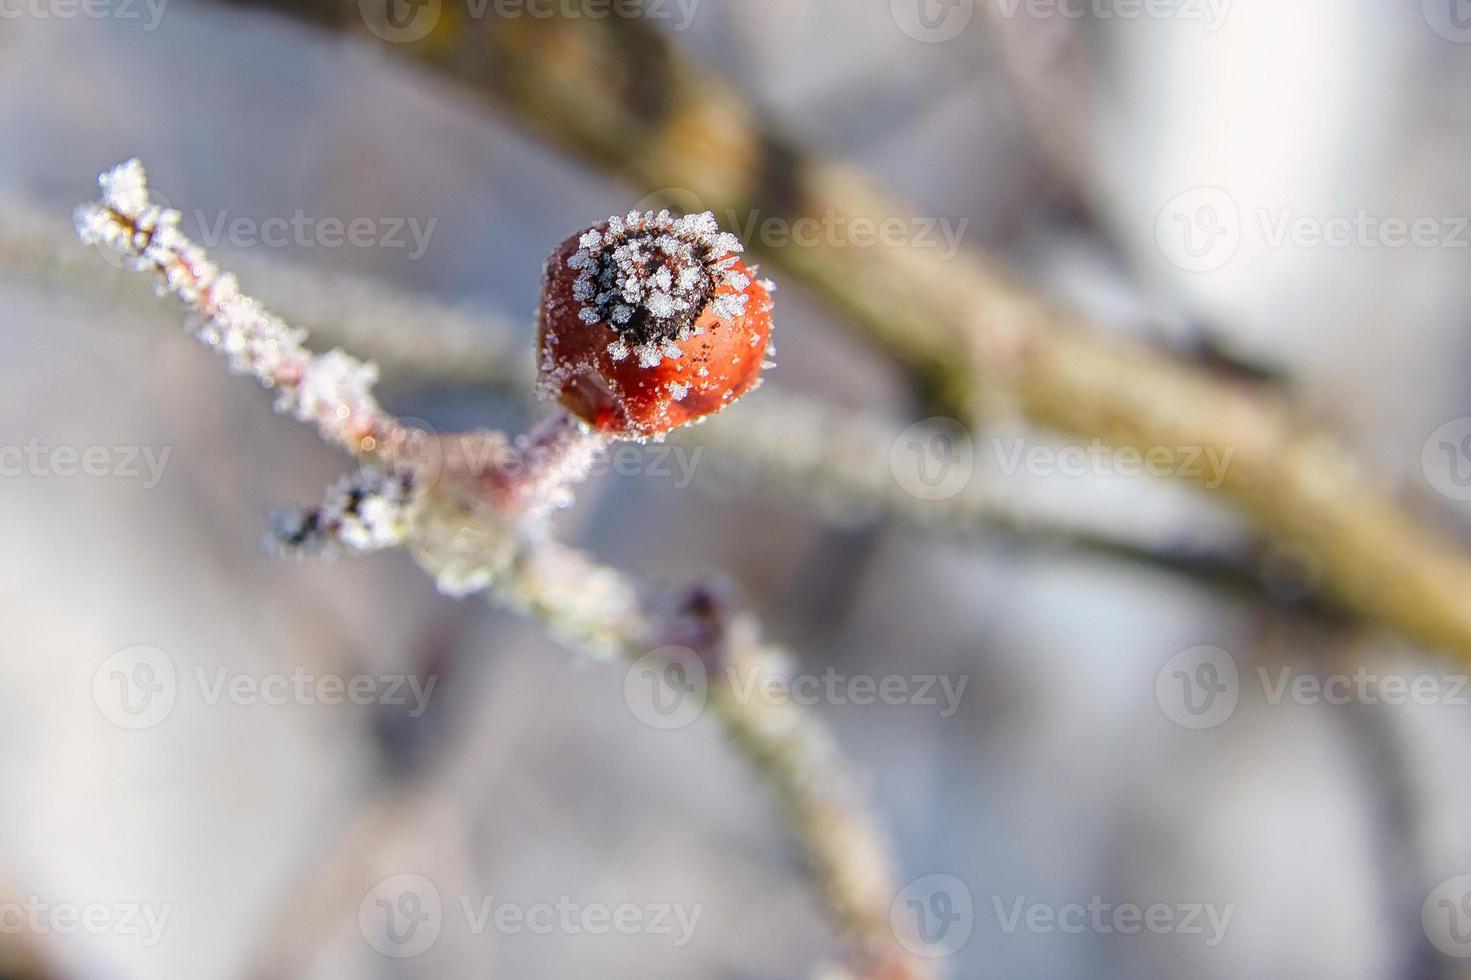 Ice crystals on a rose hip fruit. The result was a texture-rich and bizarre shapes photo